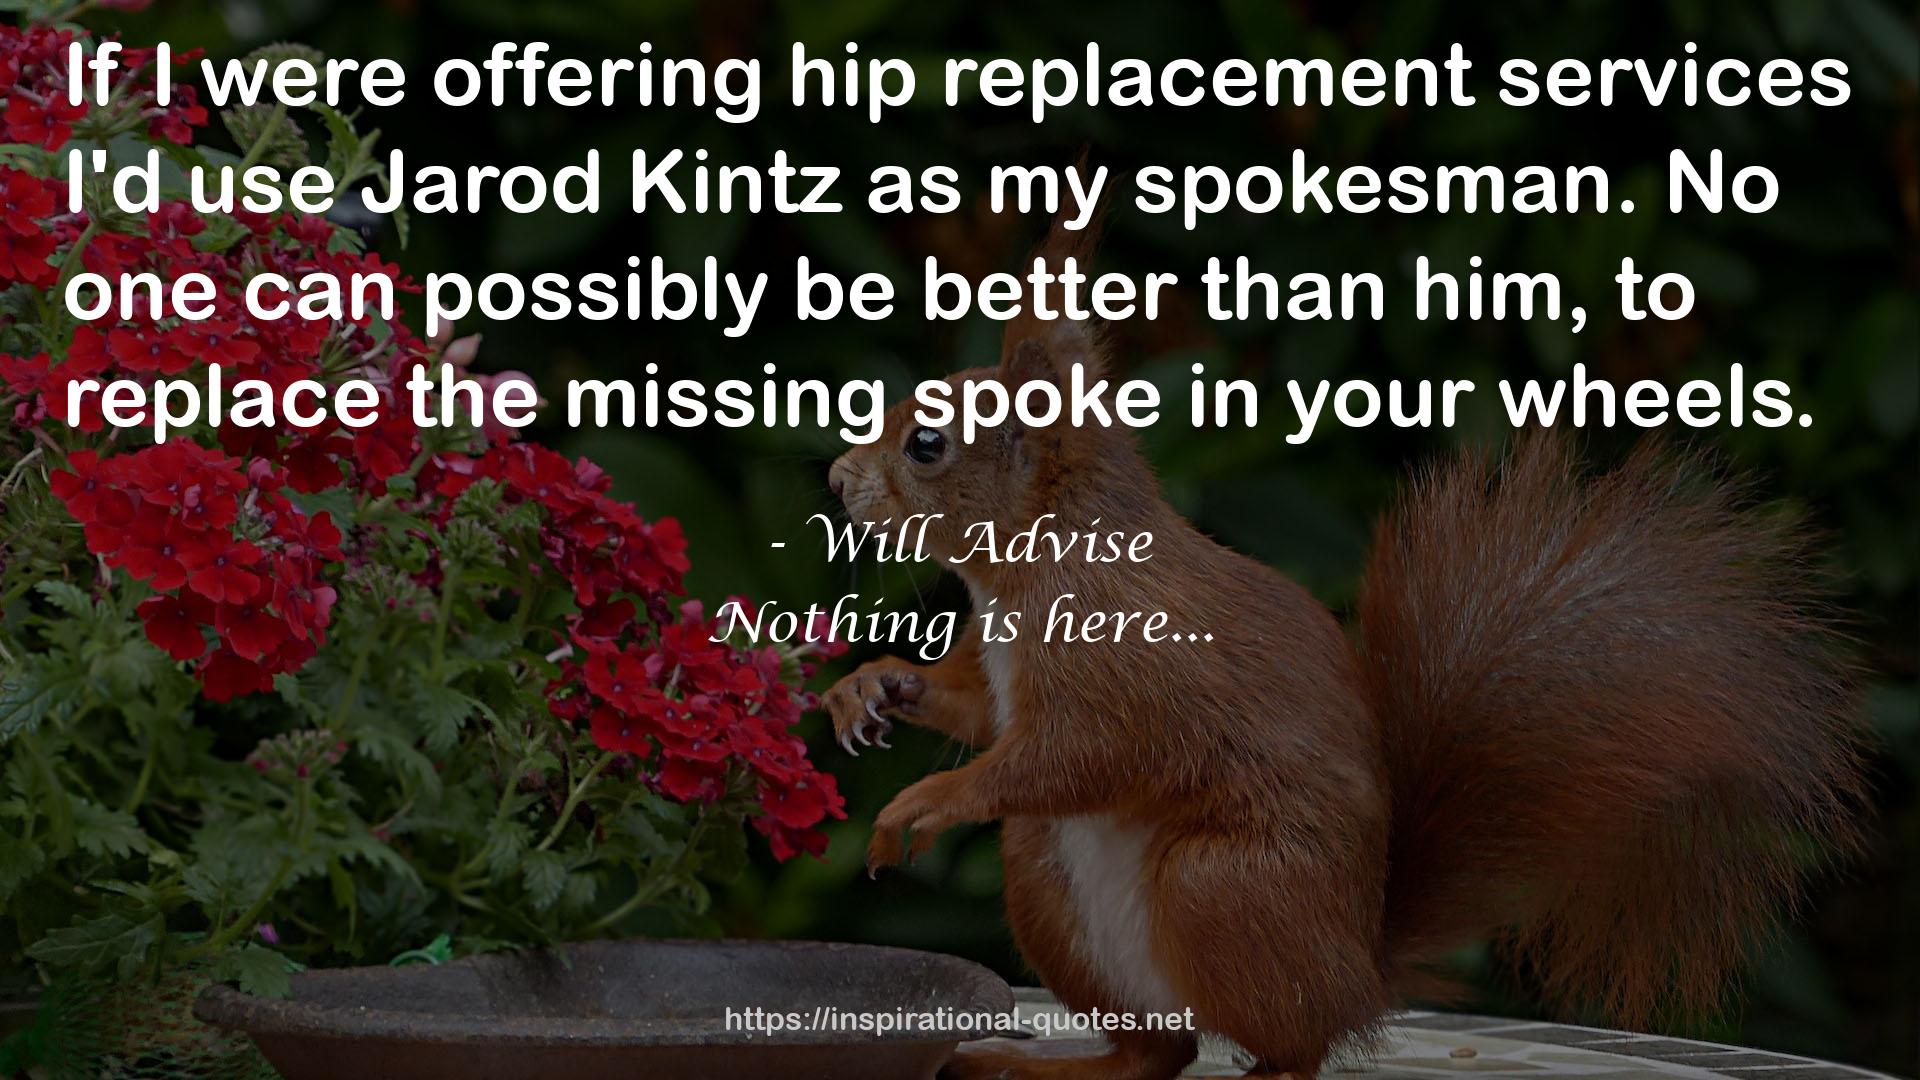 hip replacement services  QUOTES